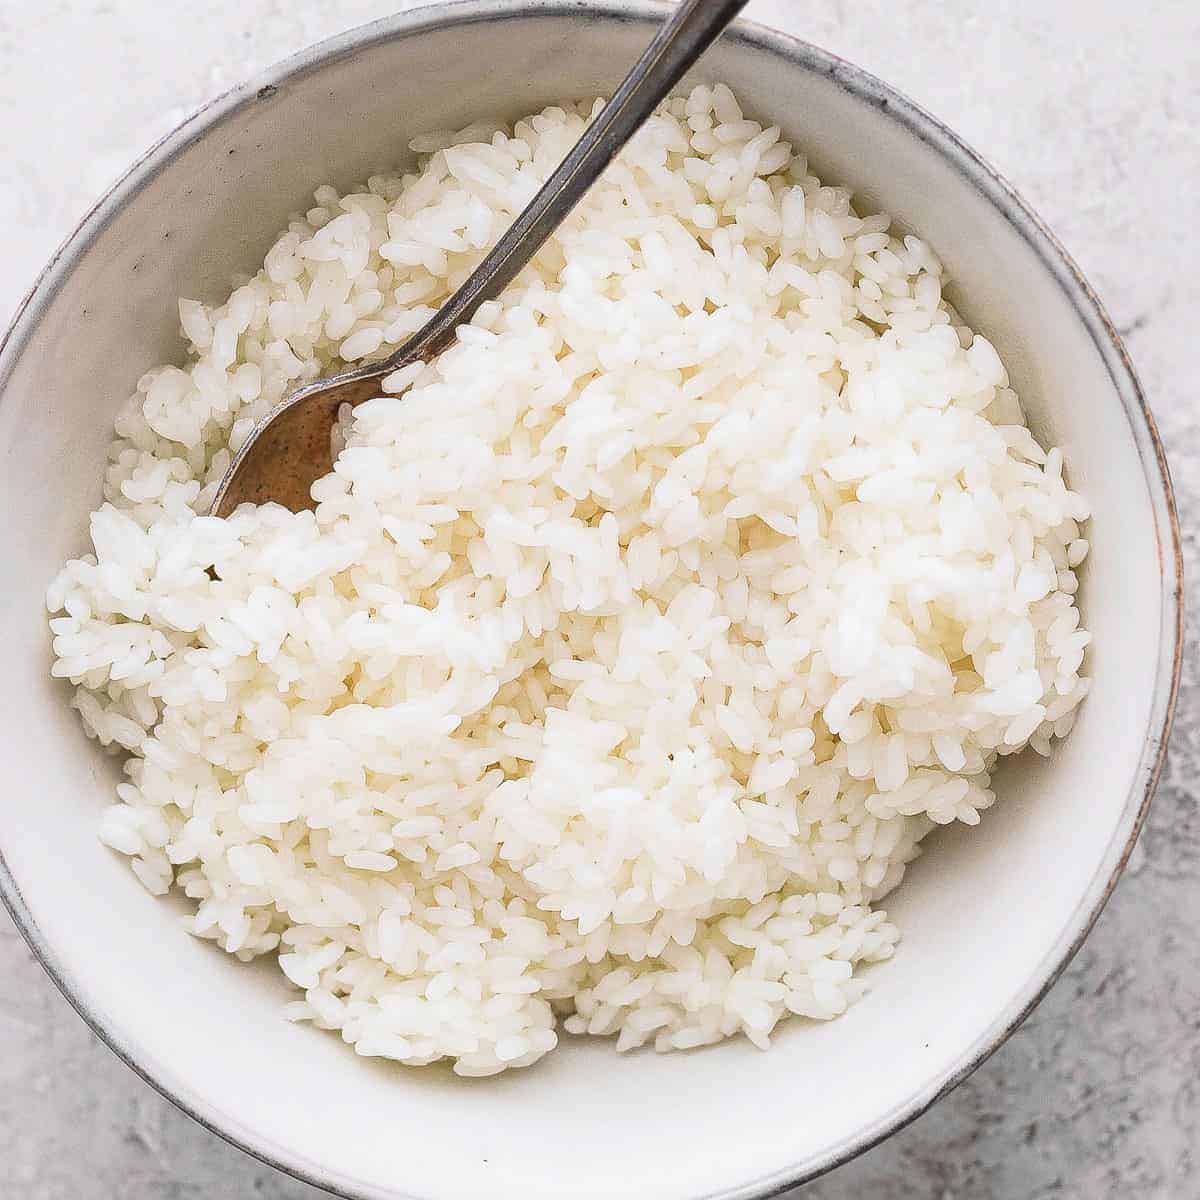 https://fitfoodiefinds.com/wp-content/uploads/2022/01/Sticky-Rice-10-1.jpg